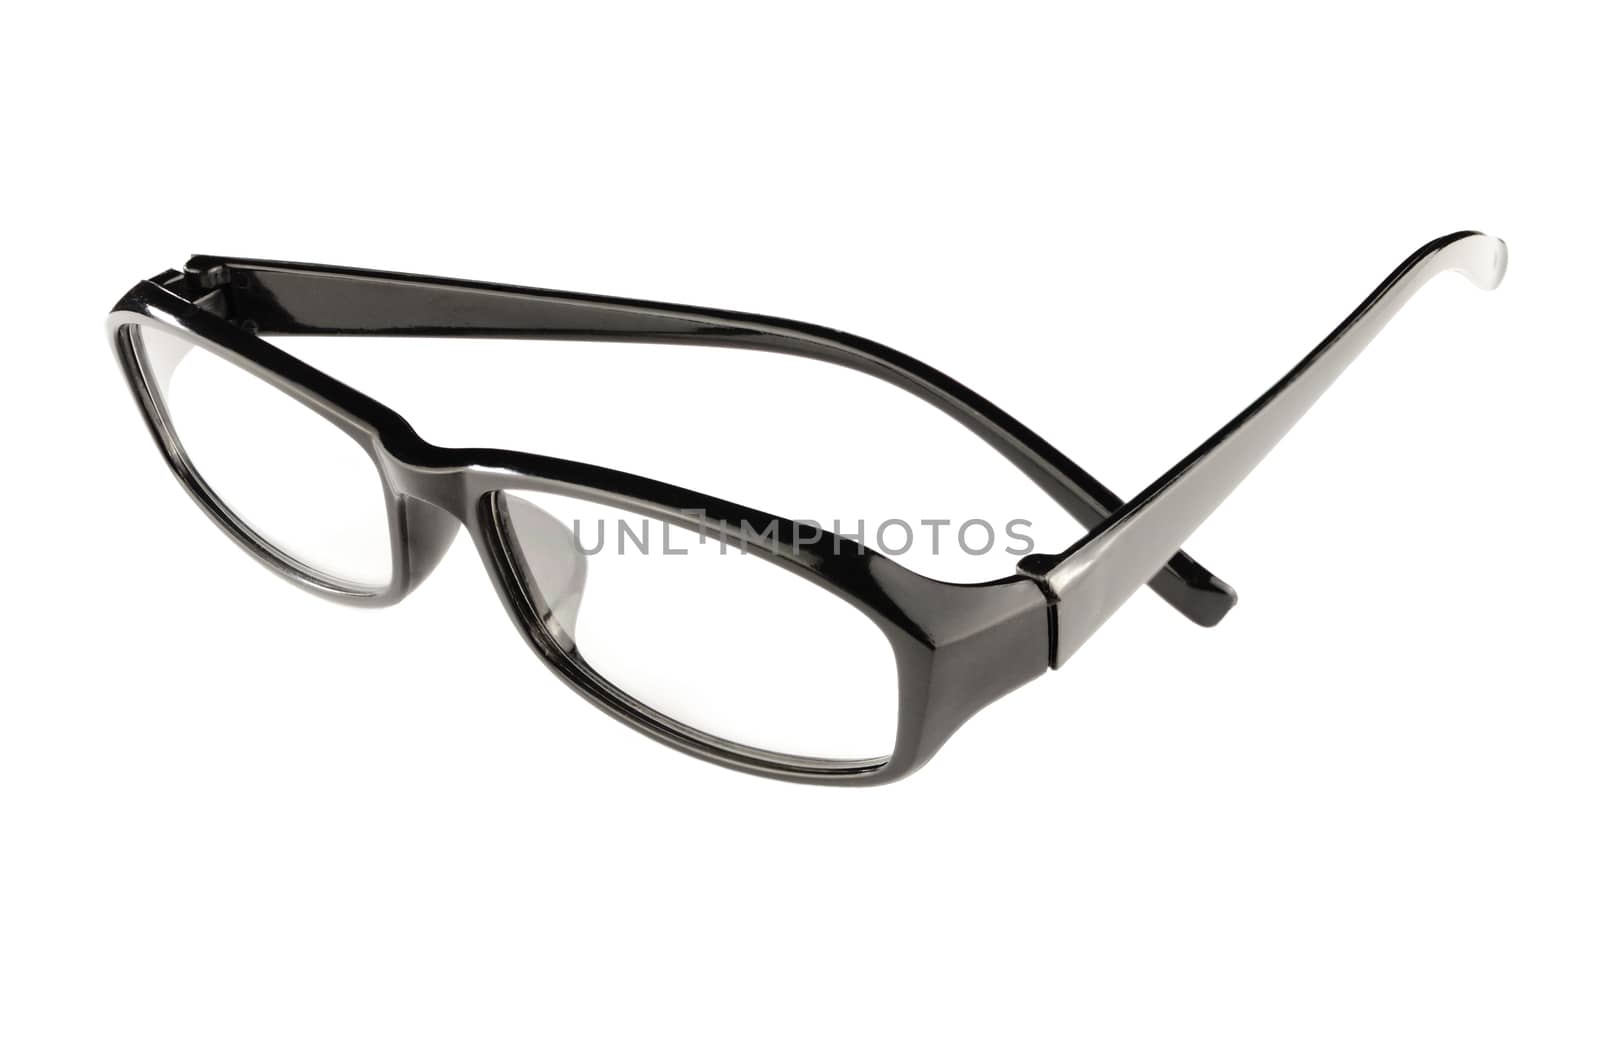 An isolated composite of black eyeglasses utilizing multiple focus points to achieve a near full focus object.